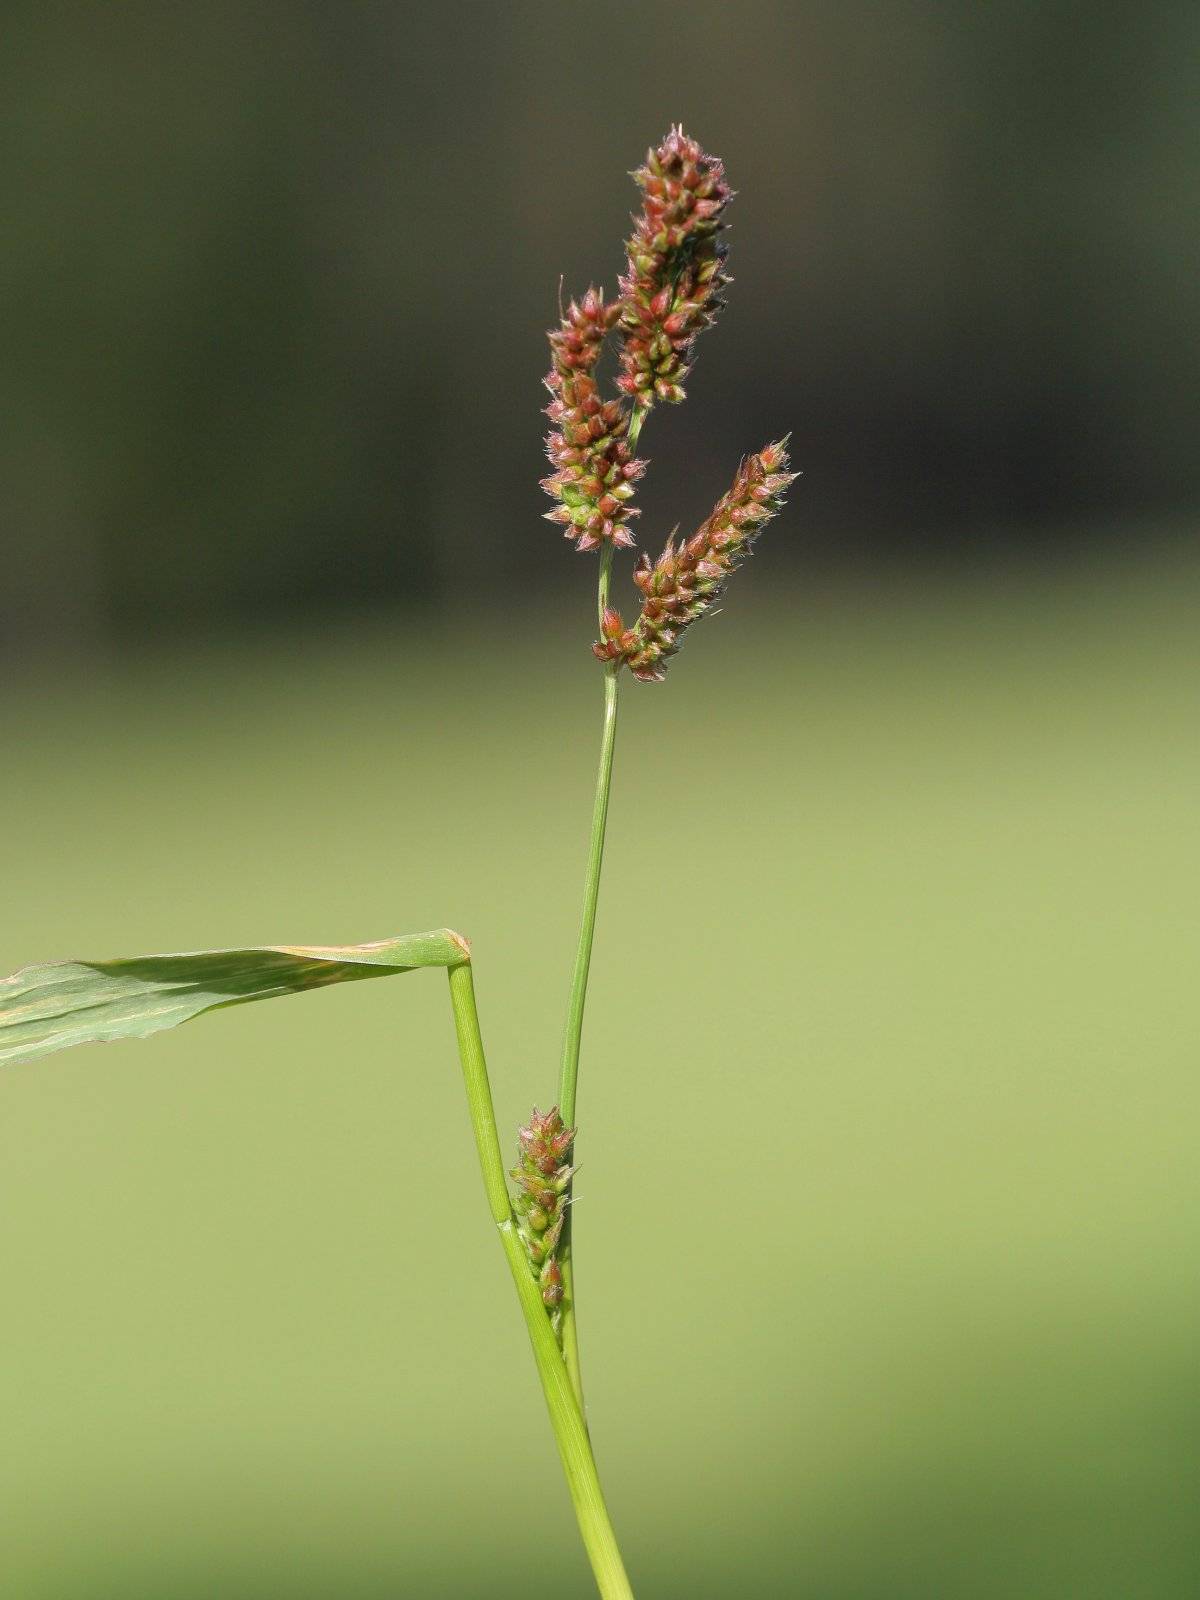 lime-burgundy spikelets with lime-green foliage